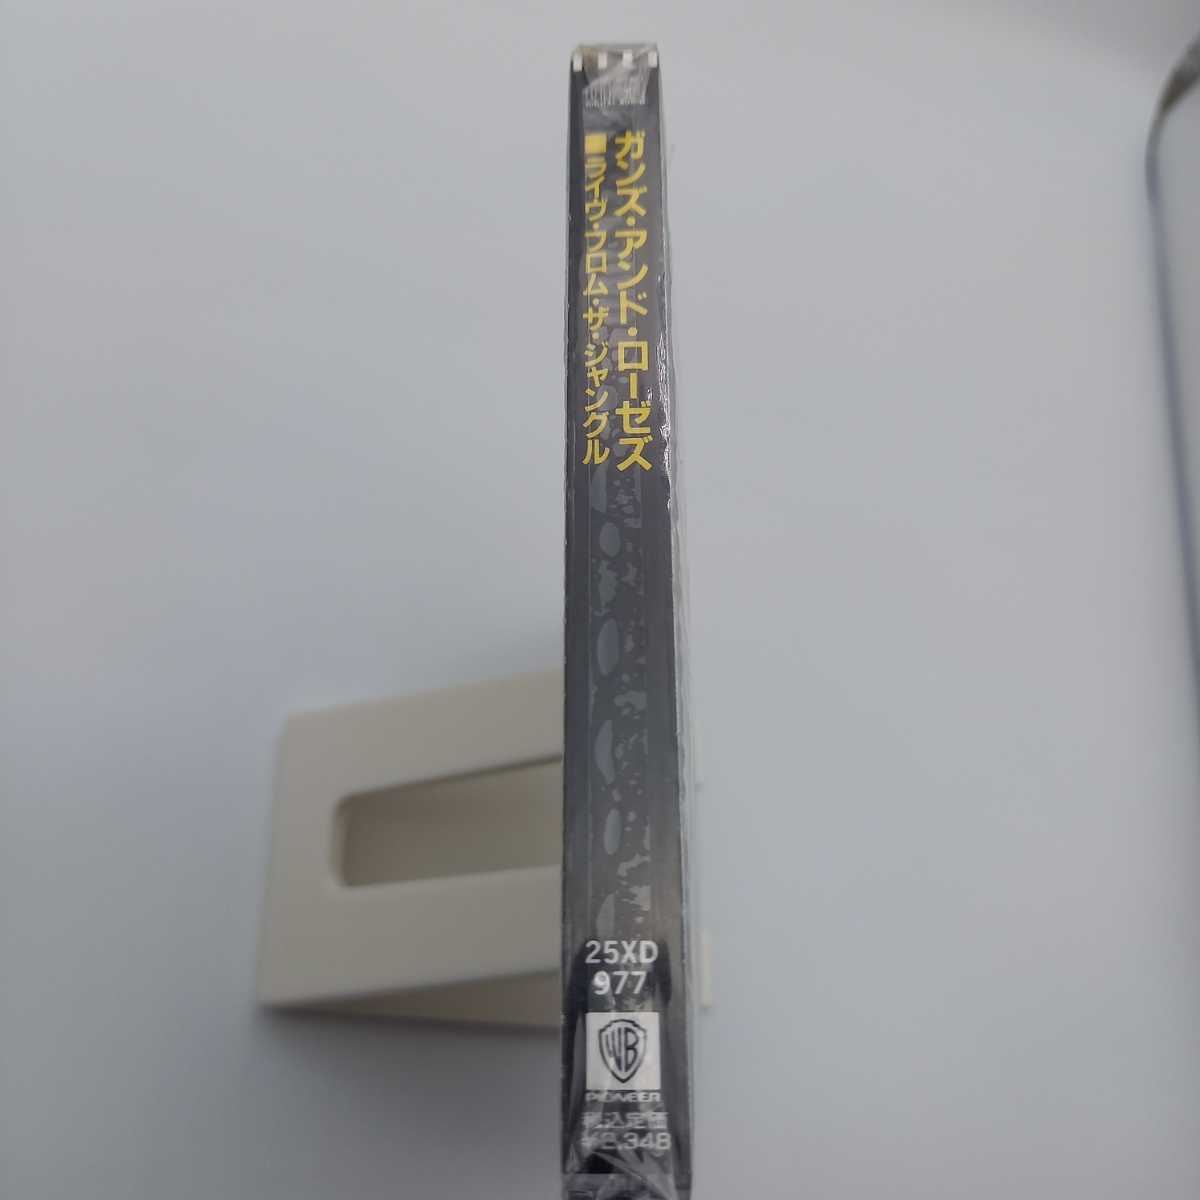 C-0602* unopened CD* gun z* and * low zez live *f rom * The * Jean gruGUNS N\'ROSES LIVE FROM THE JUNGLE 25XD-977 slash 